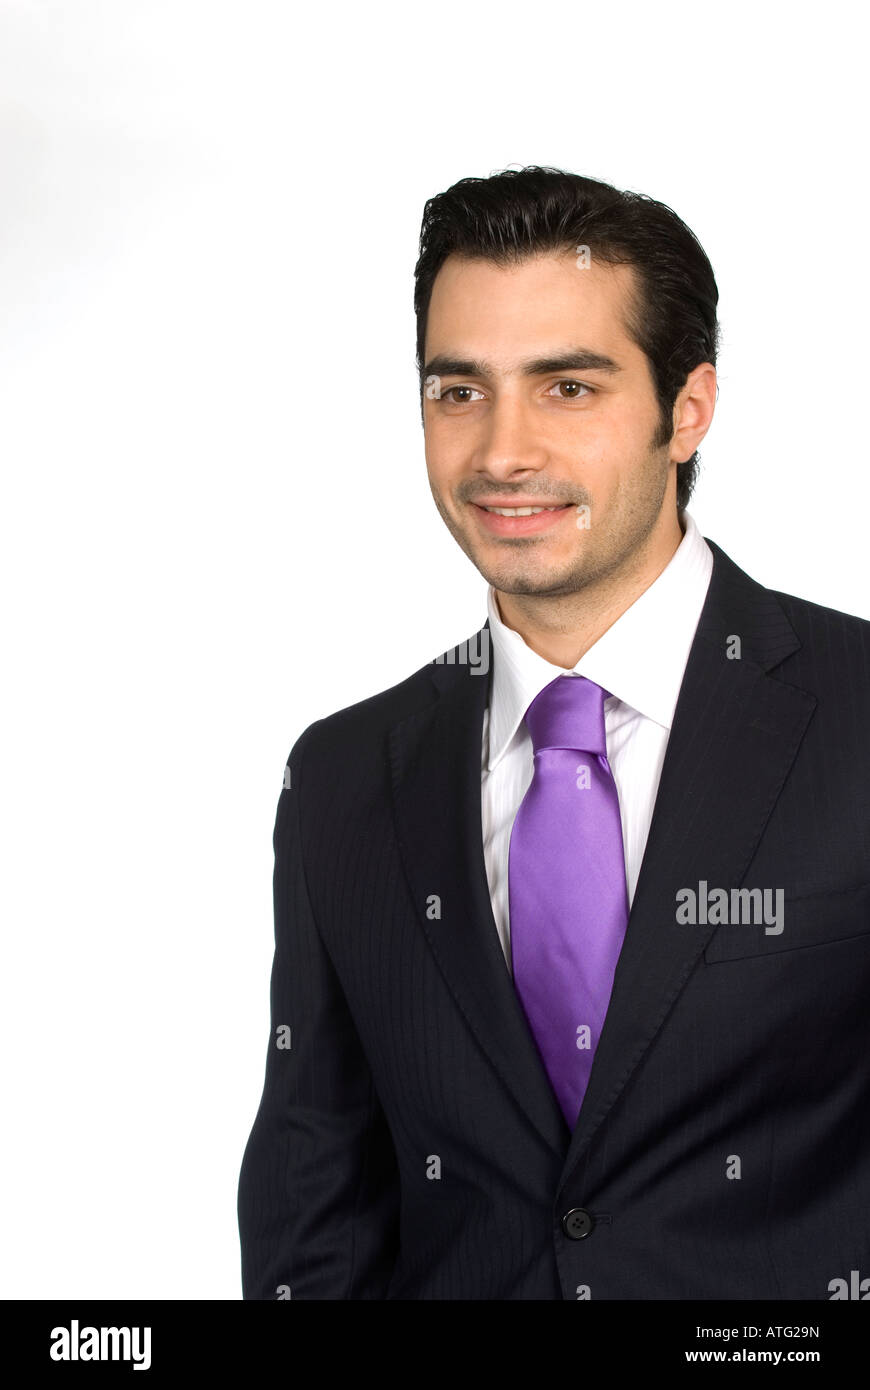 Happy business man wearing a suit looking away smiling Stock Photo